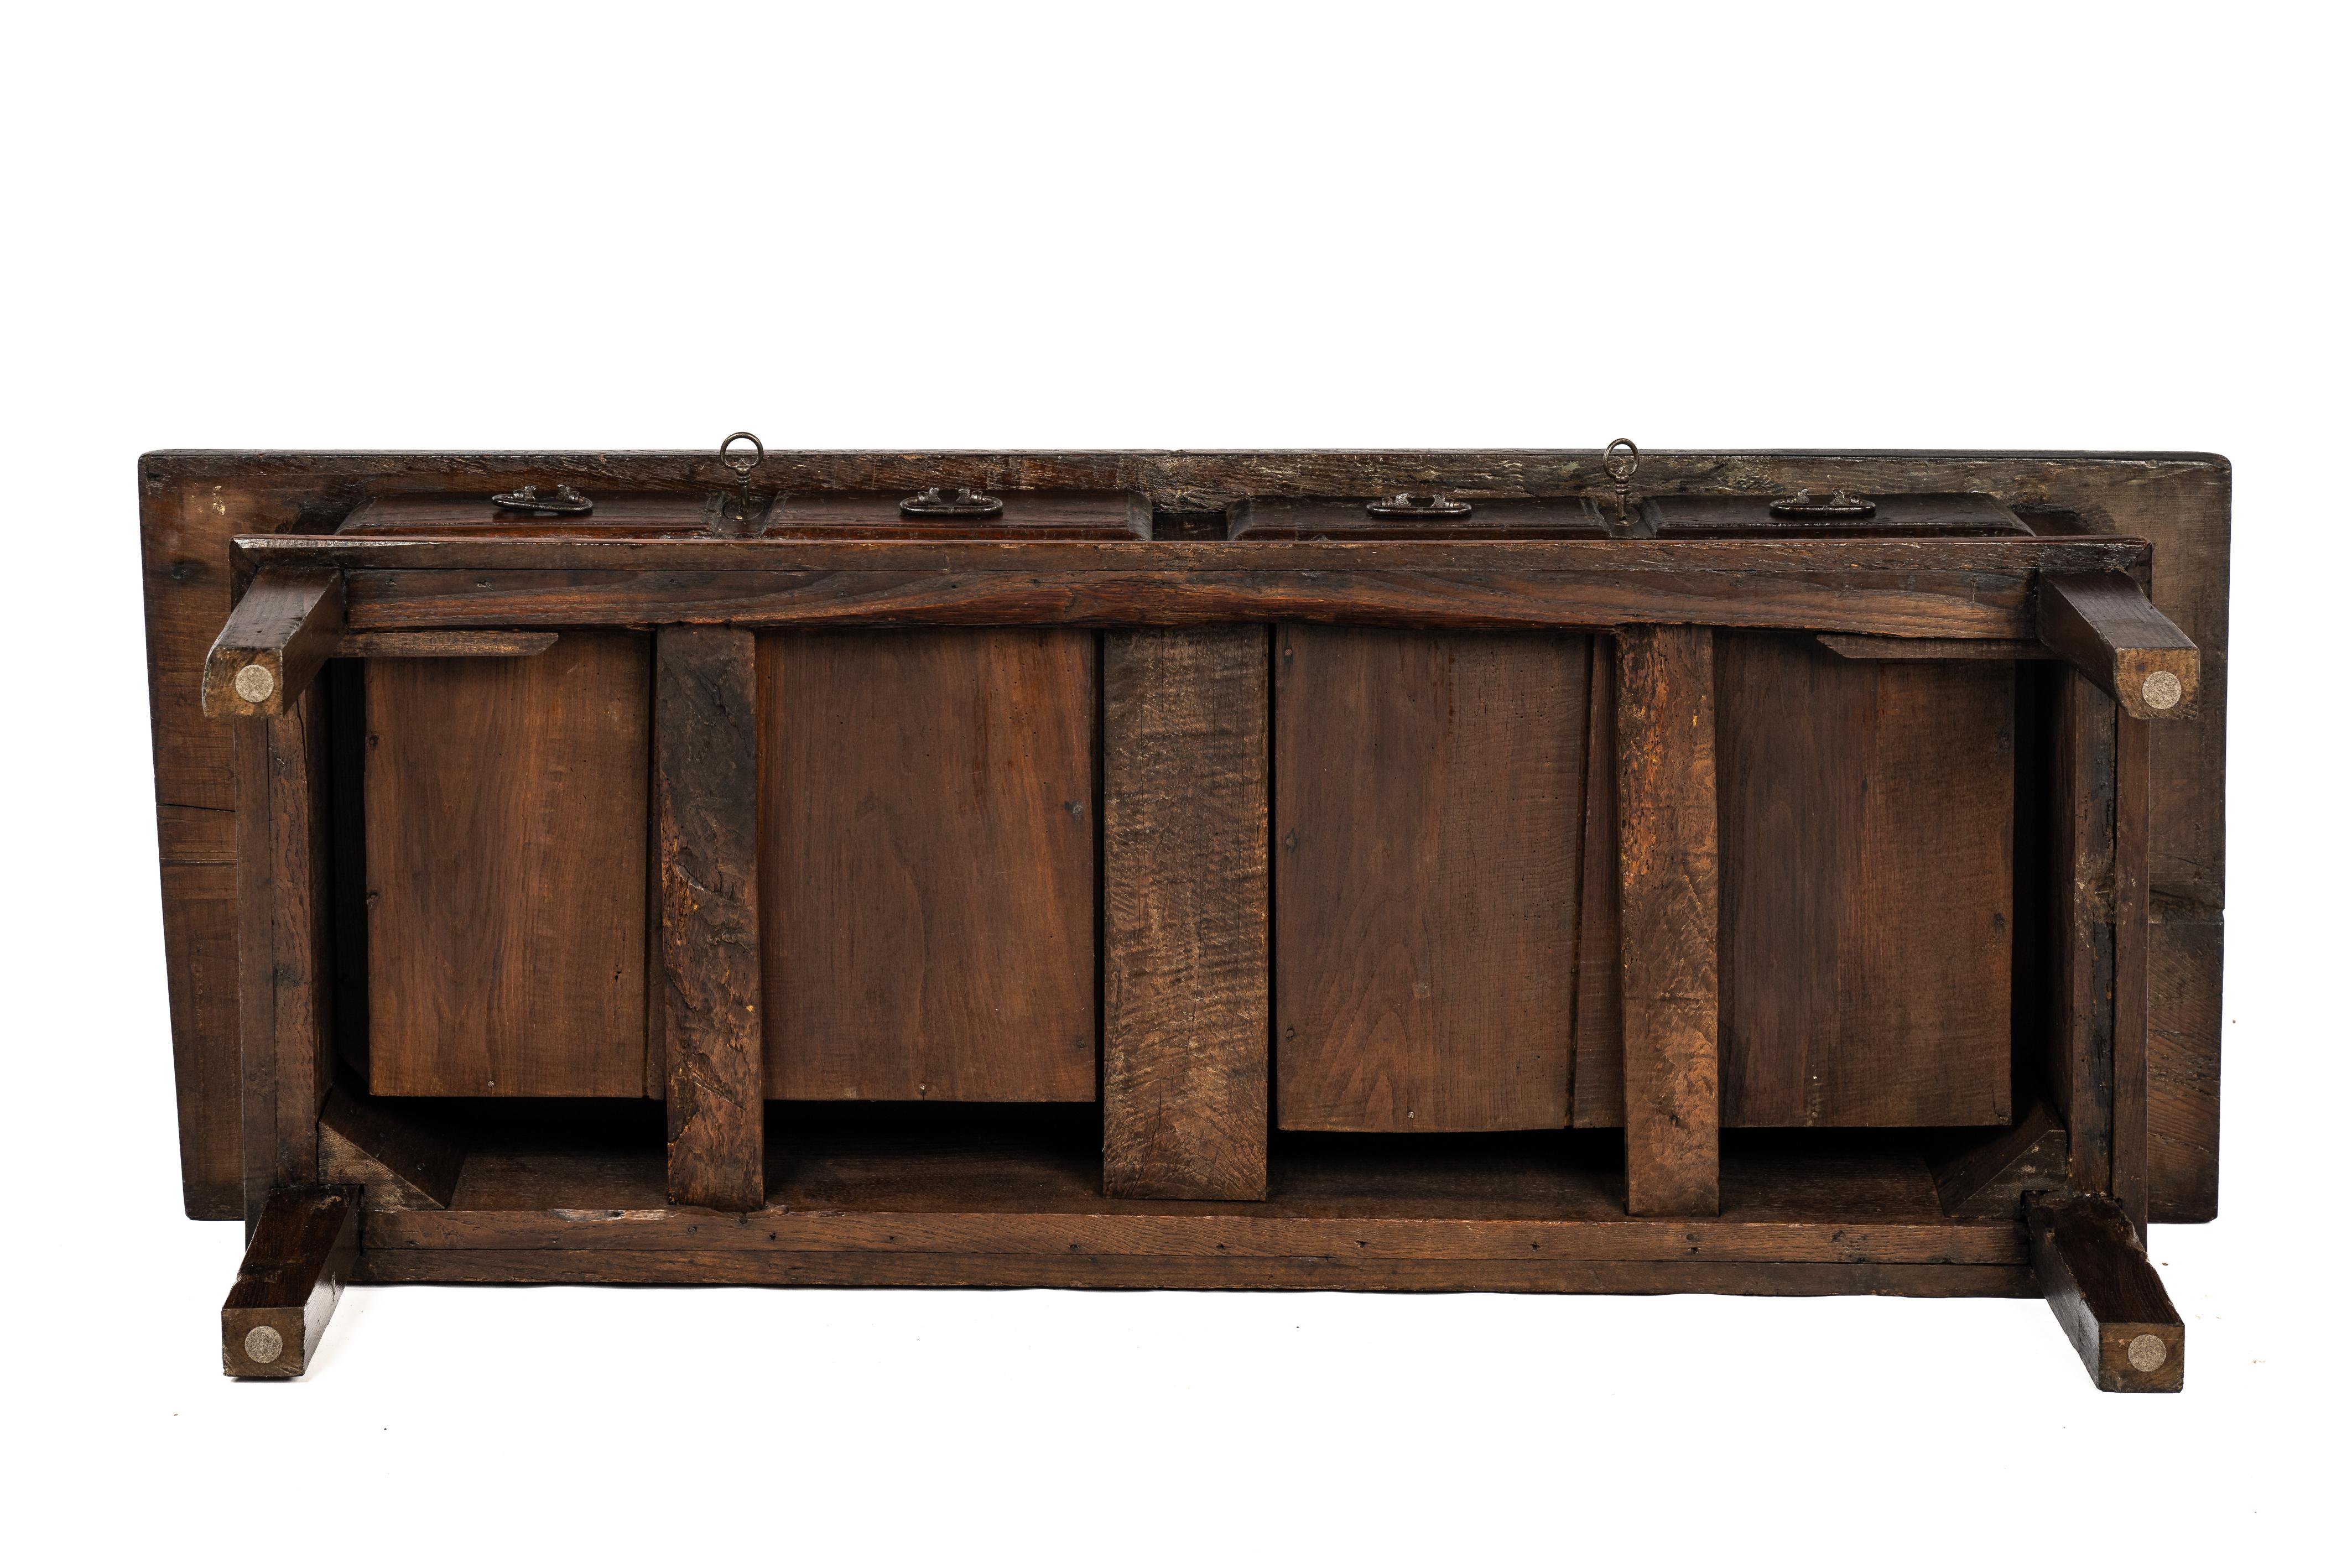 Steel Antique Early 19th Century Rustic Spanish Warm Dark Brown Chestnut Coffee Table For Sale